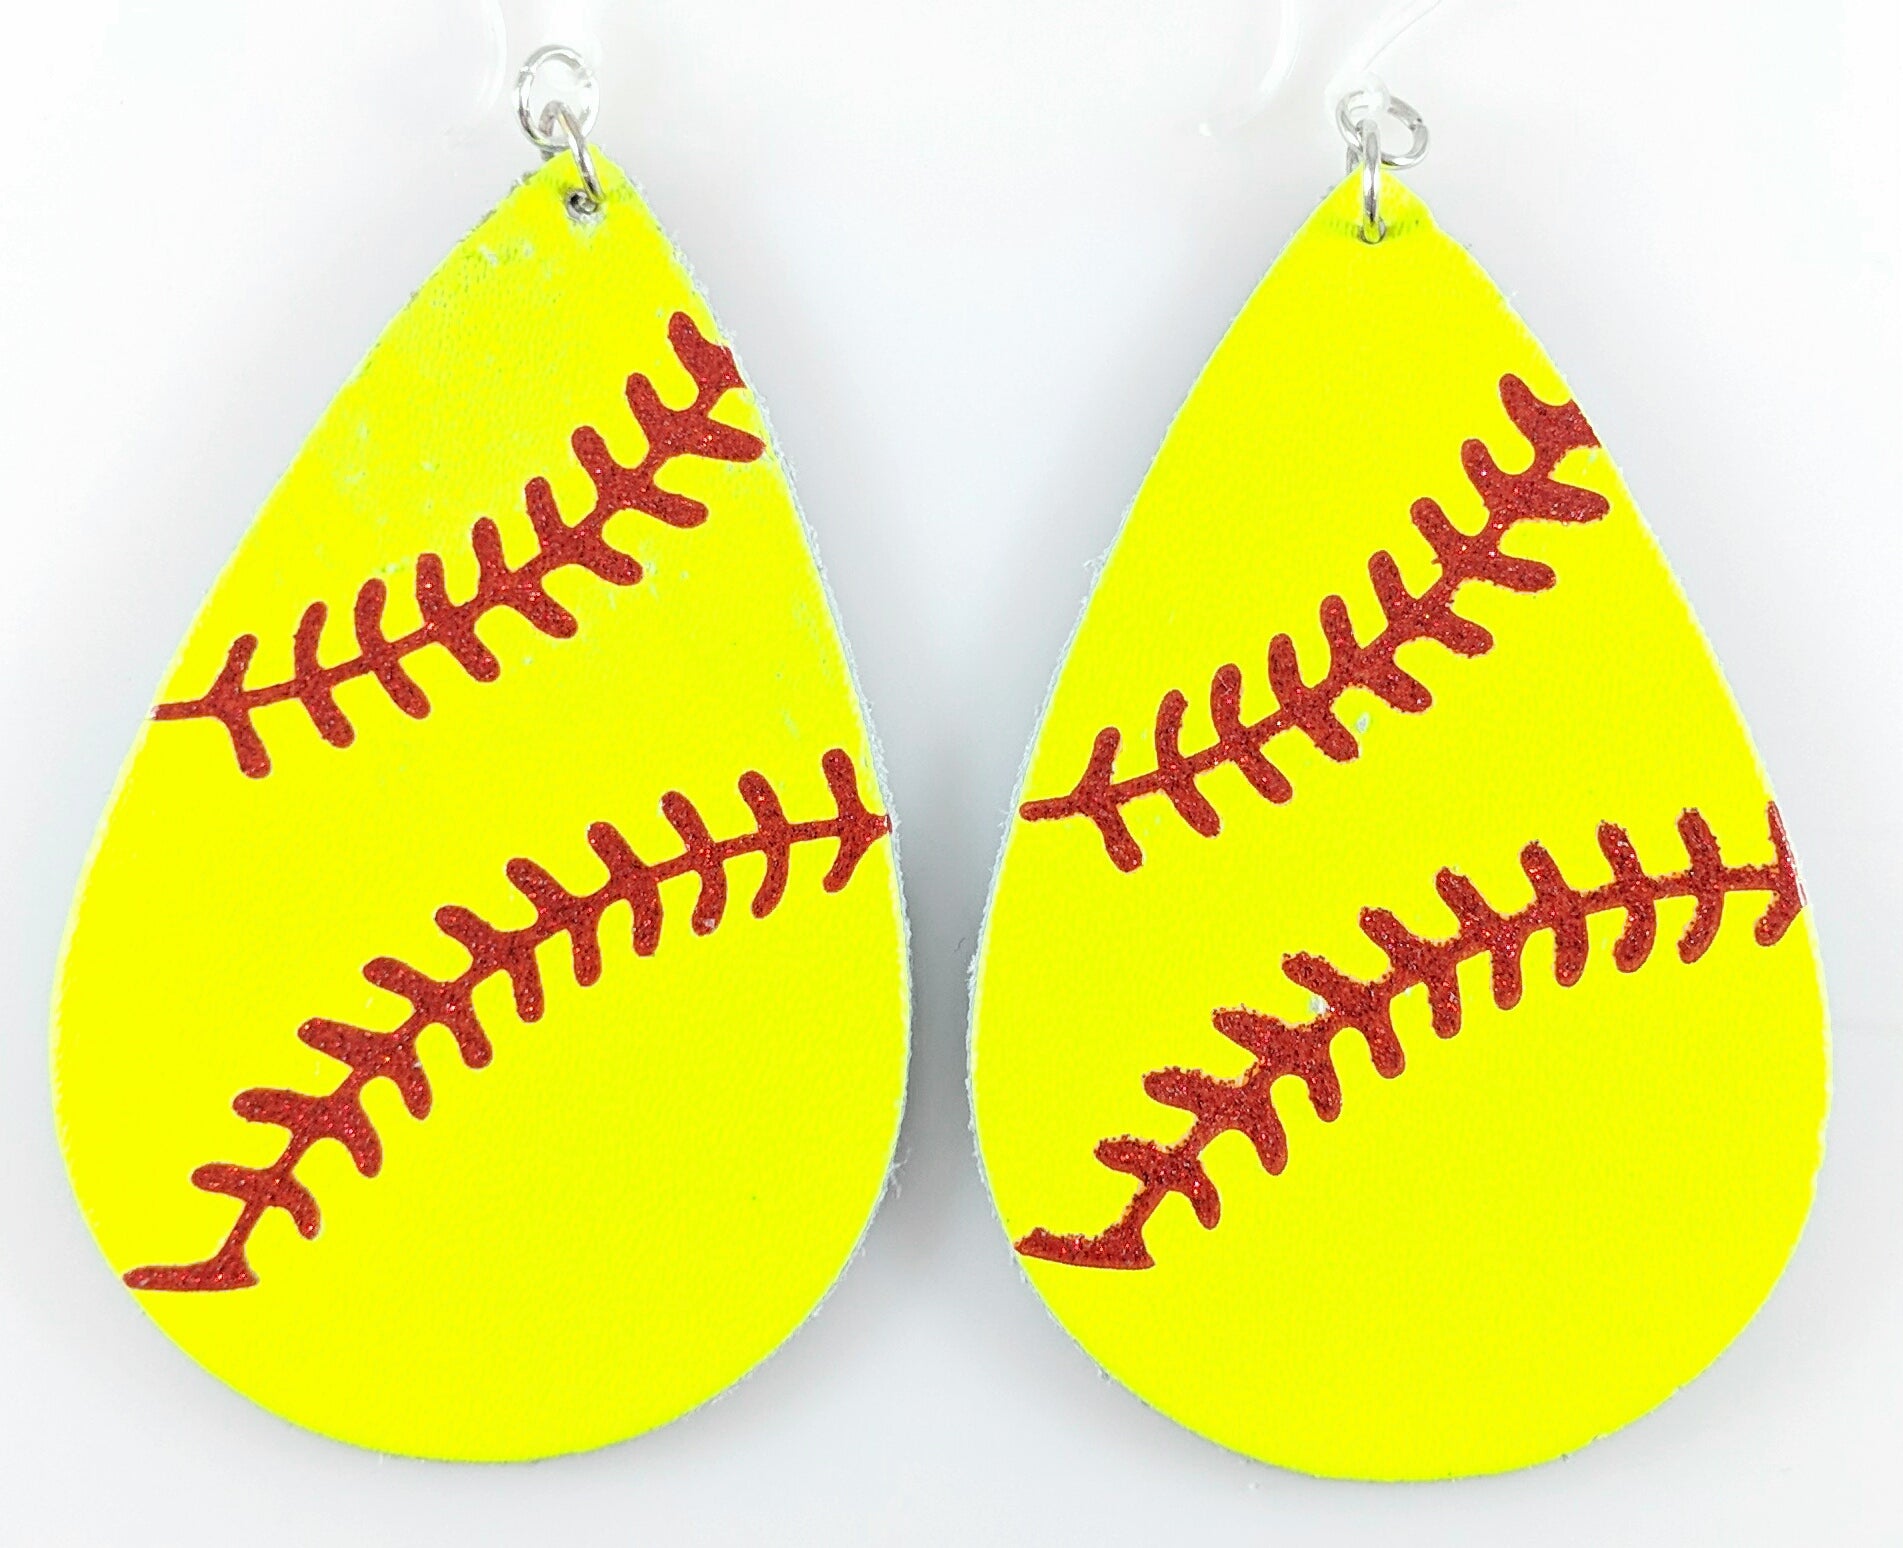 Softball Stitch Earrings (Teardrop Dangles) - yellow and red